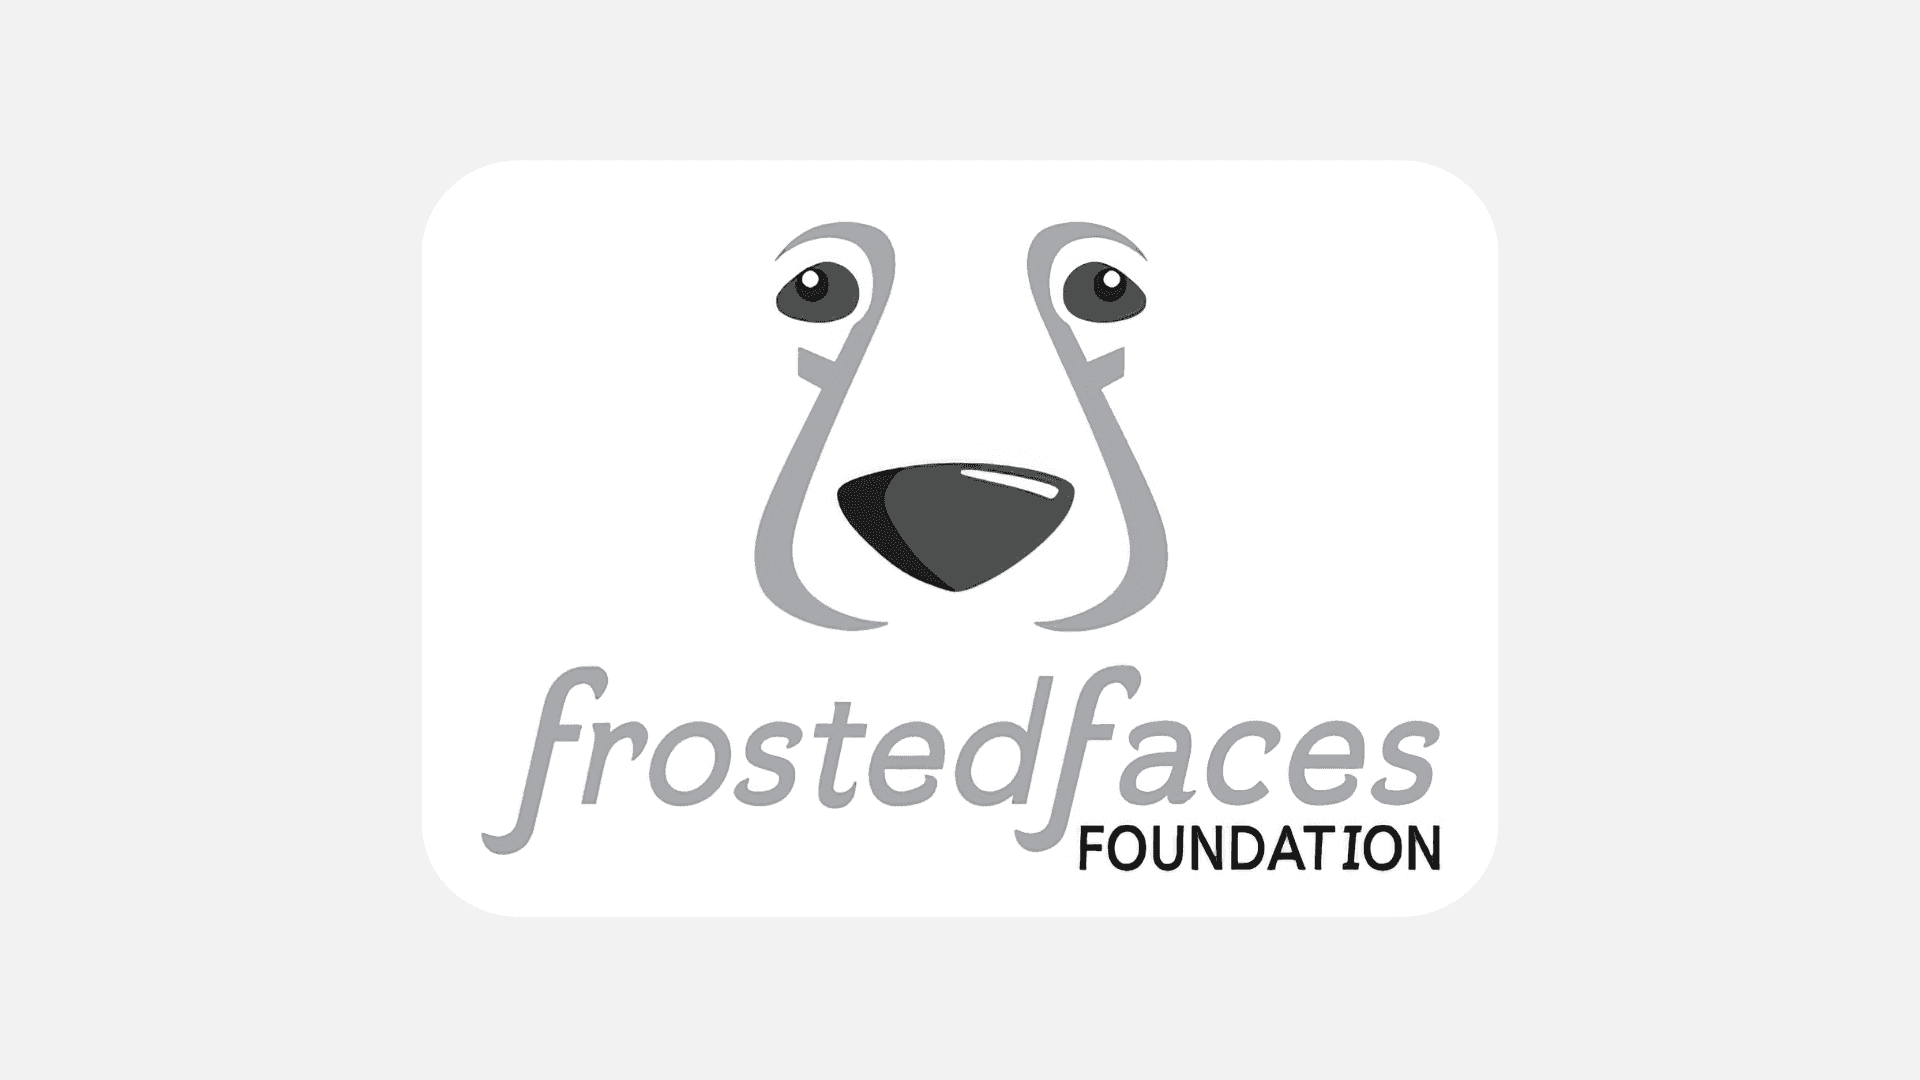 Frosted Faces Foundation